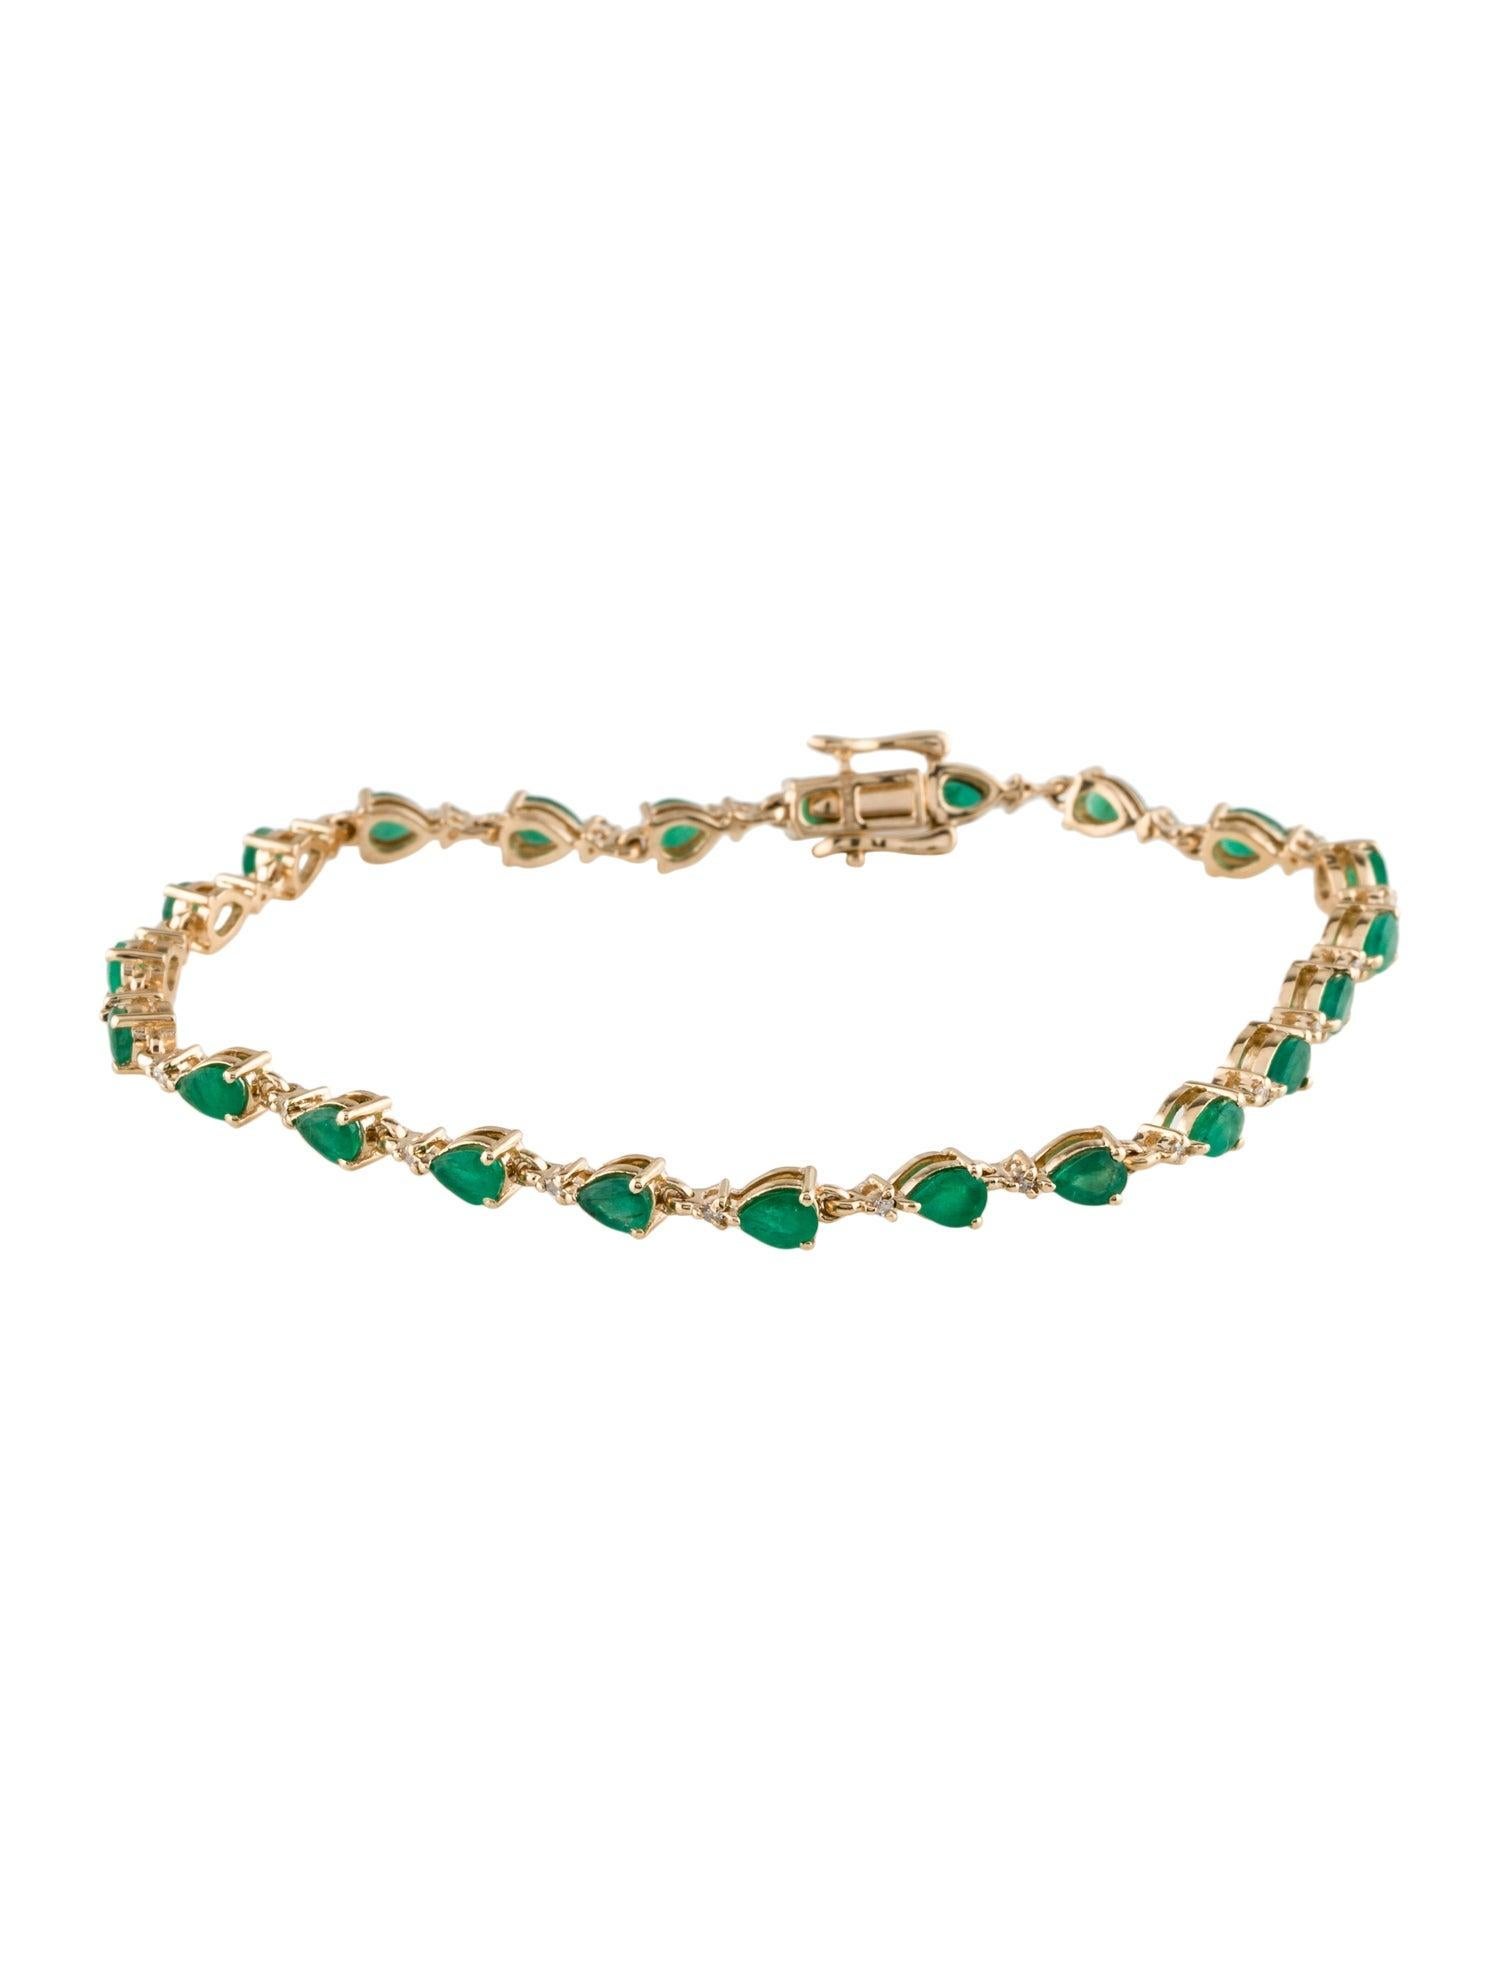 Delight in the unparalleled elegance of our 14K Yellow Gold Link Bracelet, a harmonious blend of luxury and design. This exquisite piece features 3.78 carats of Pear Modified Brilliant Emeralds, paired with 0.15 carats of near colorless diamonds.